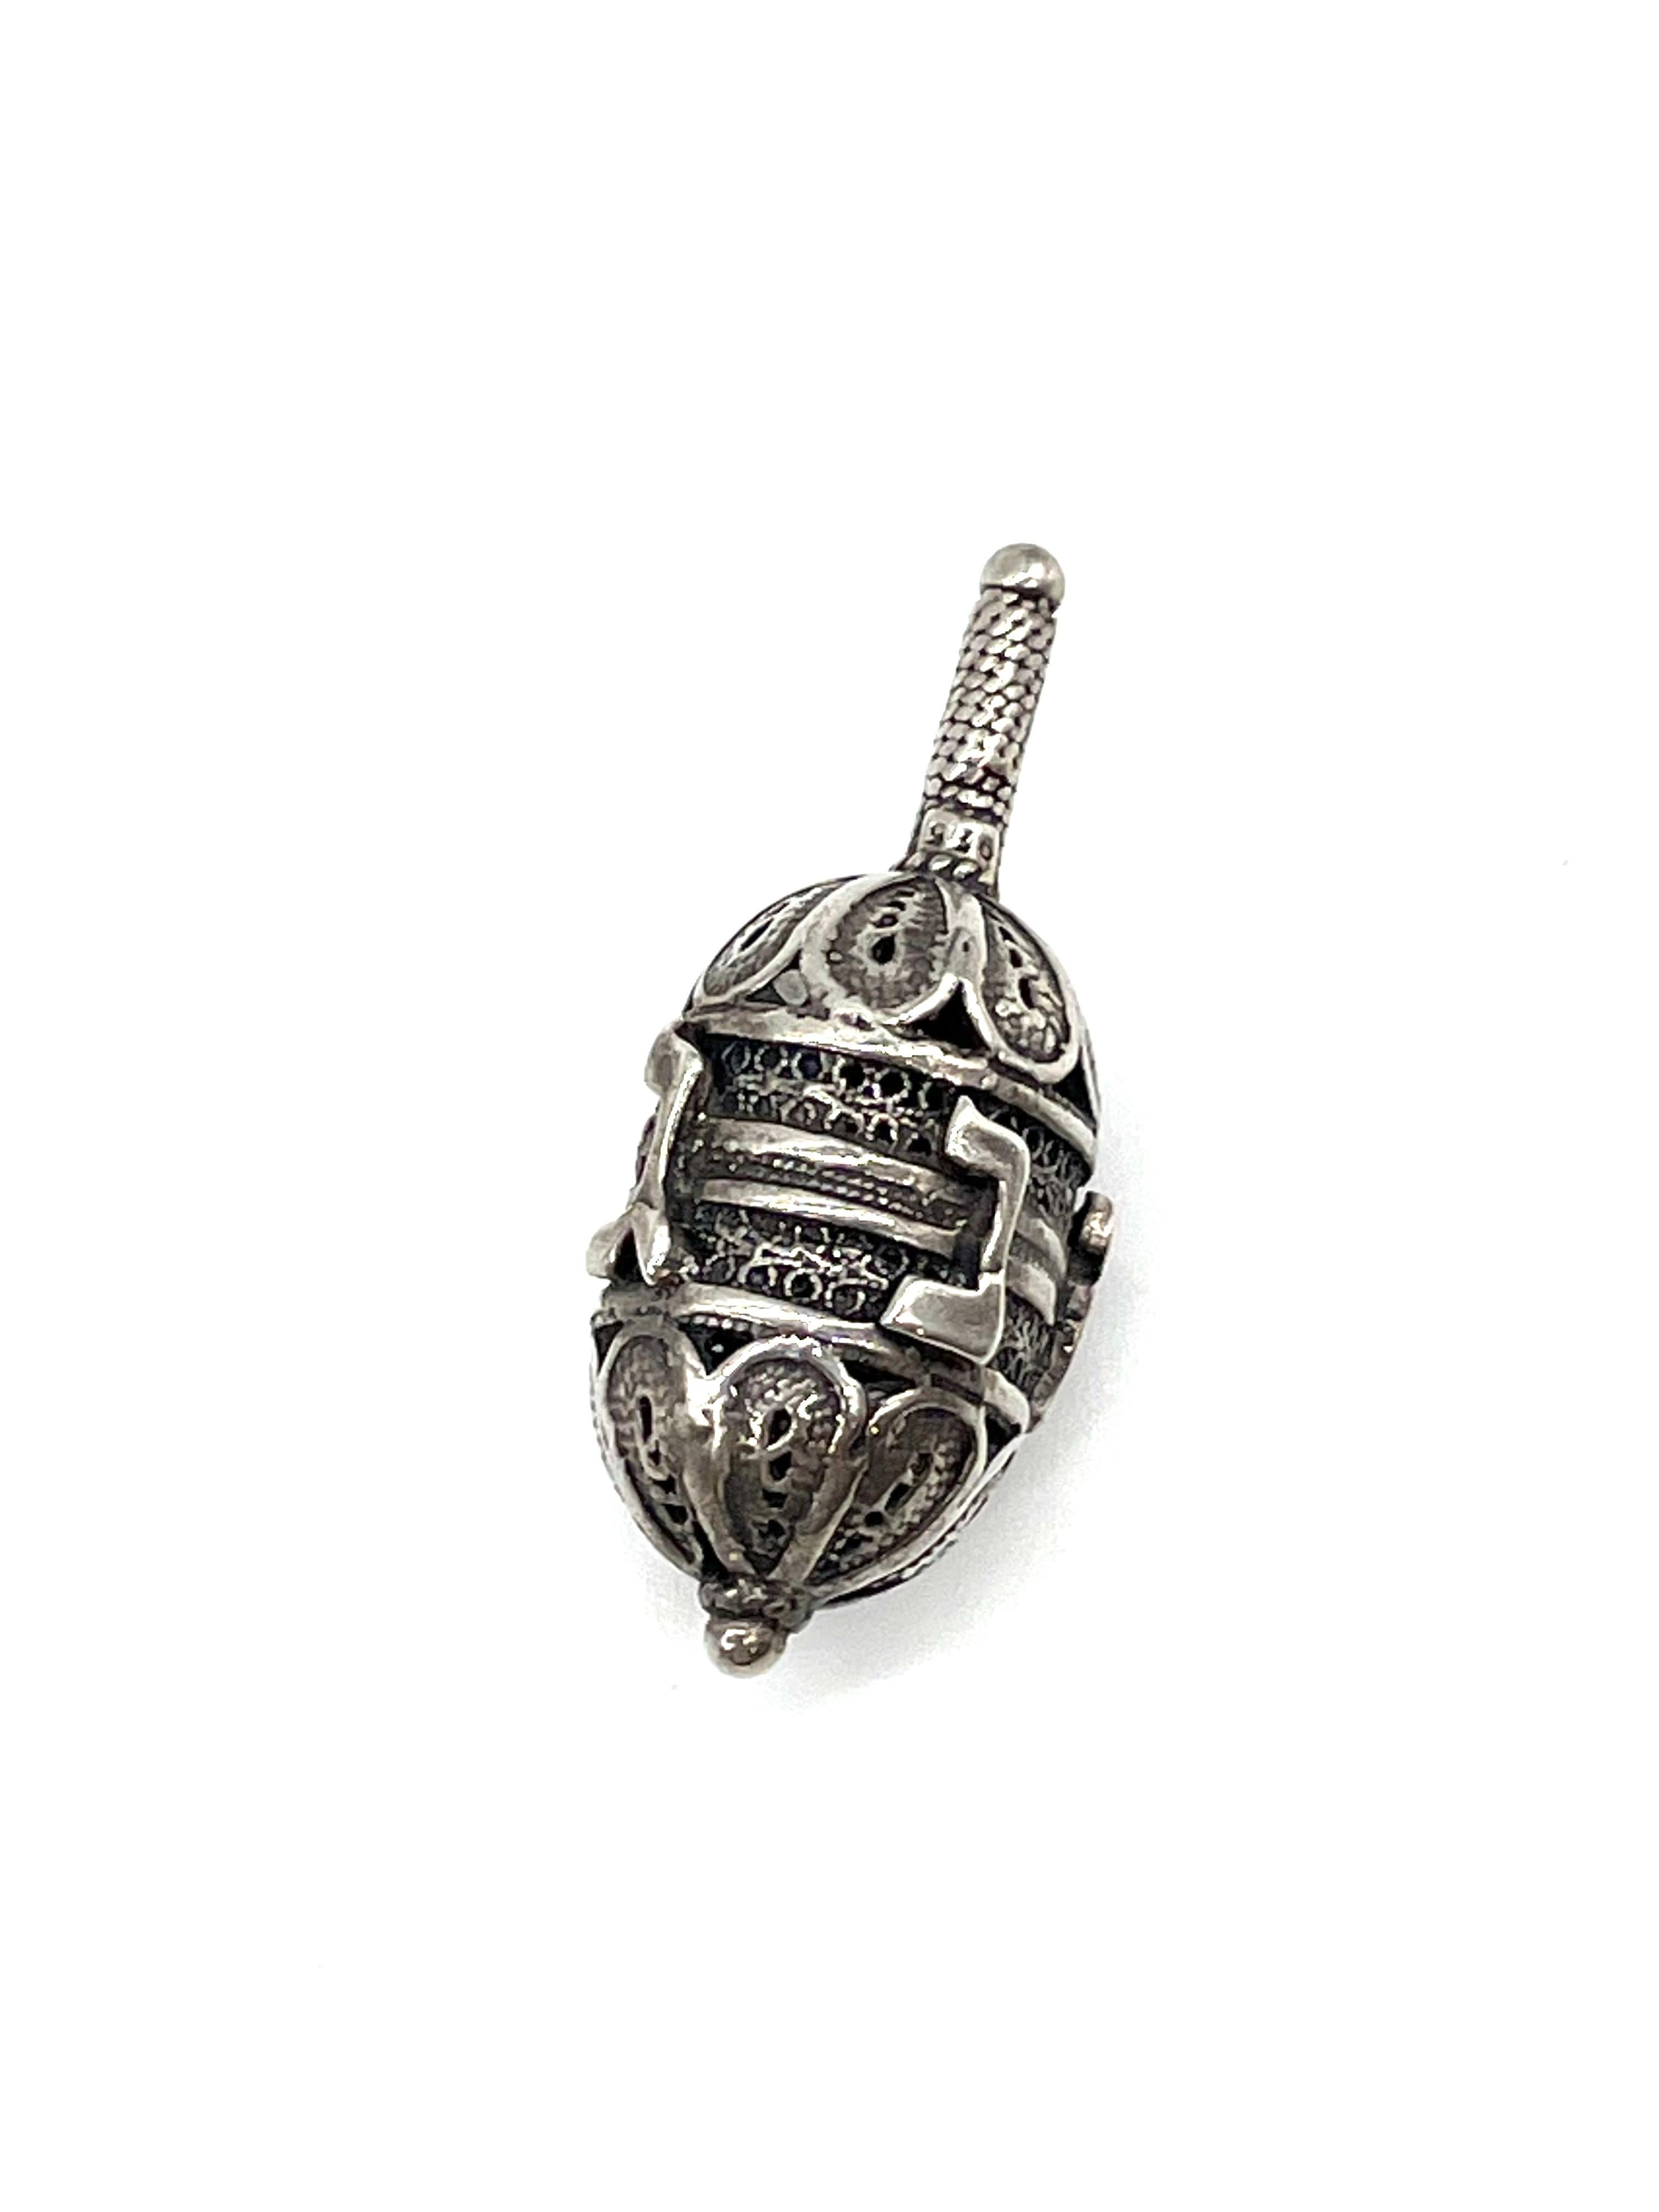 Handmade sterling silver dreidel, Jerusalem, Israel, circa 1950. 
Made from silver filigree. Stamped with Israeli silver hallmarks. The four letters nun, heh, gimel, shin are stamped in Hebrew to represent 